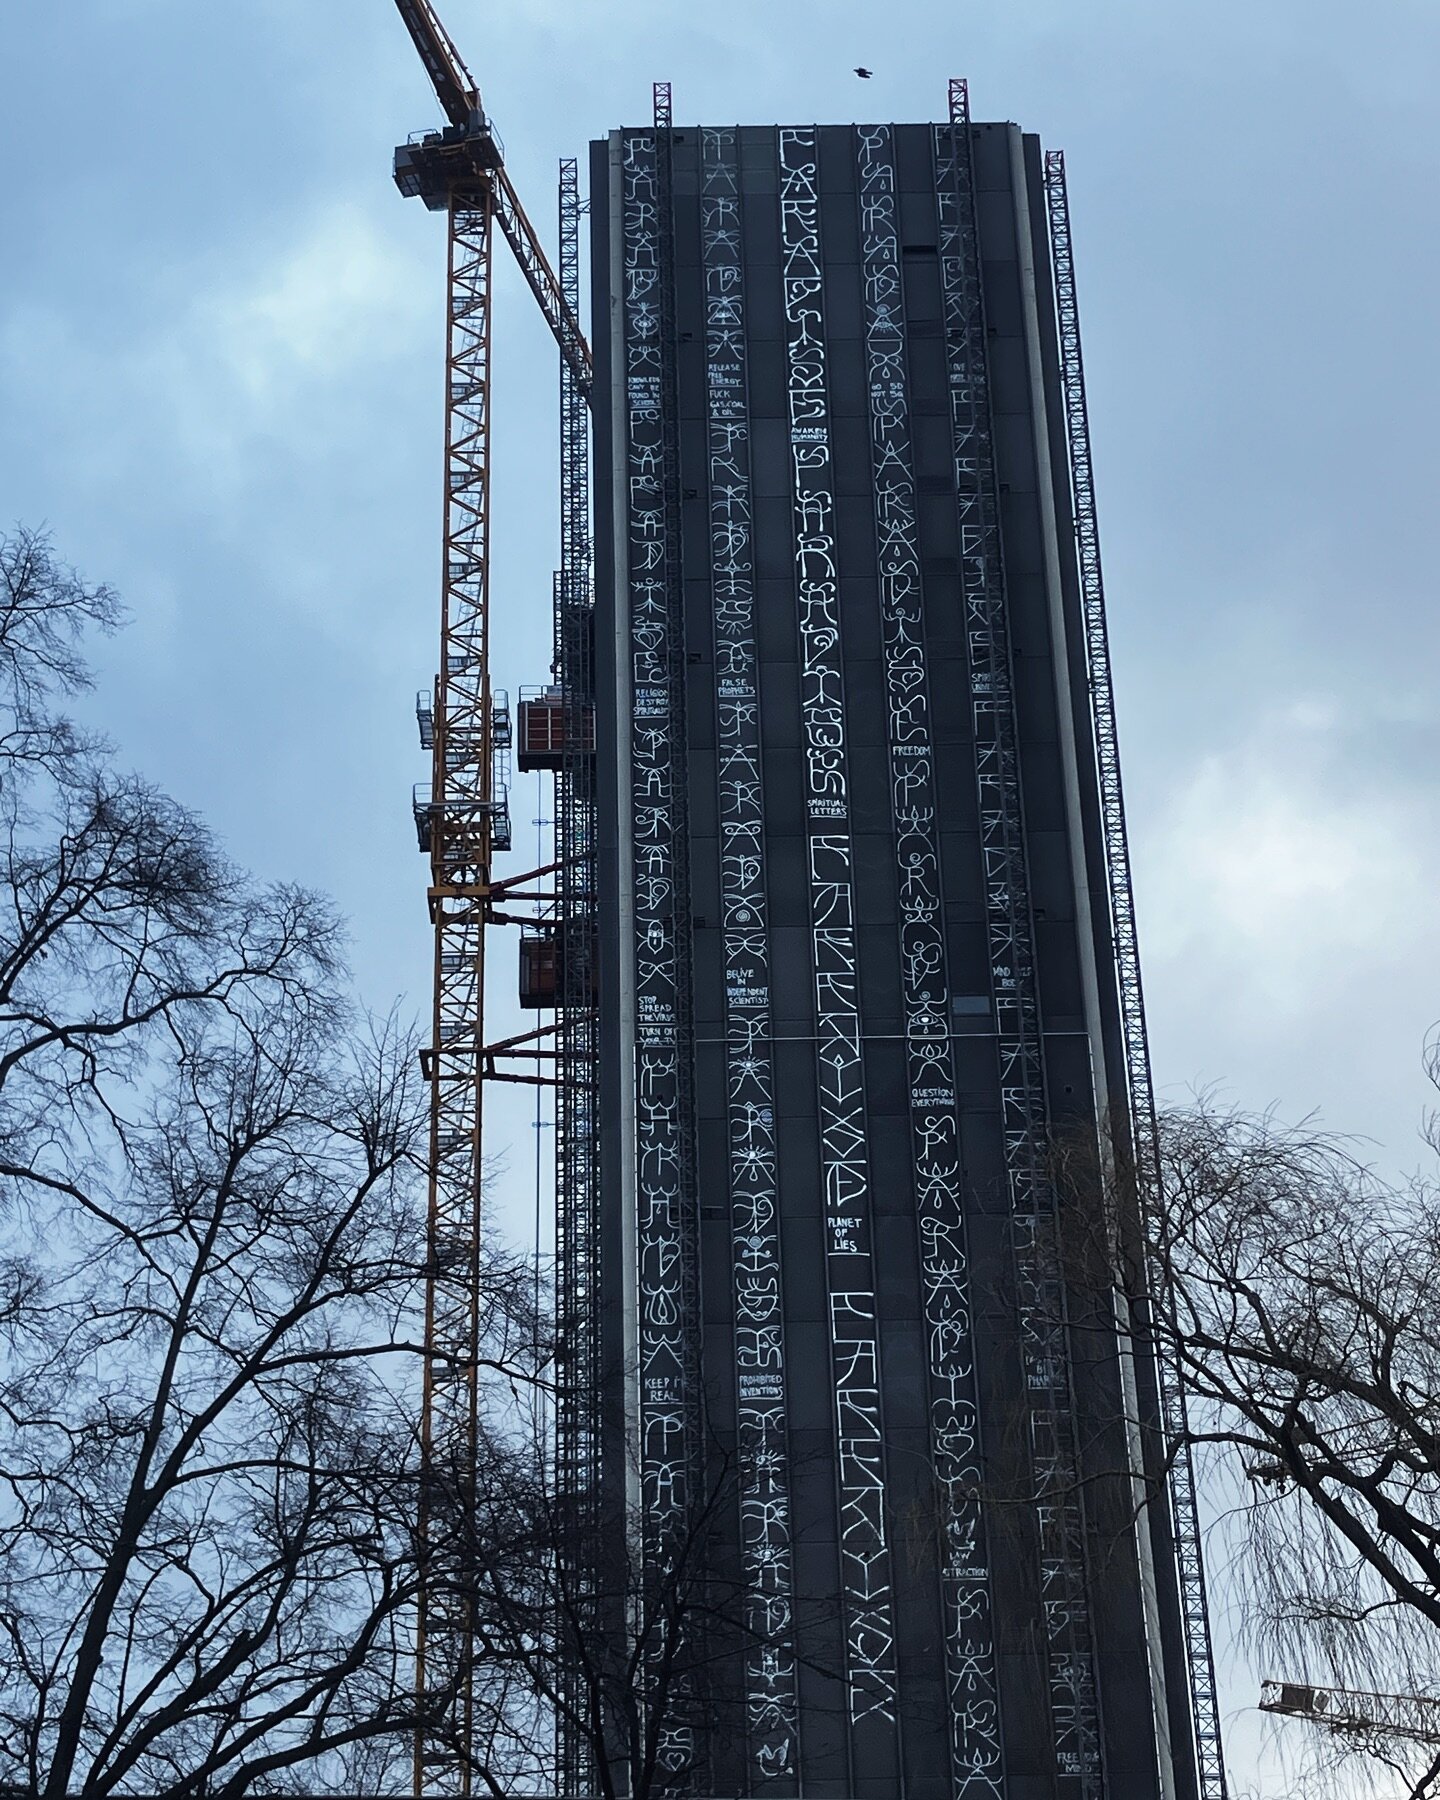 A deeply impressive bit of graffiti from Kreuzberg. It looks like they climbed the lift support structure and did this all by hand.